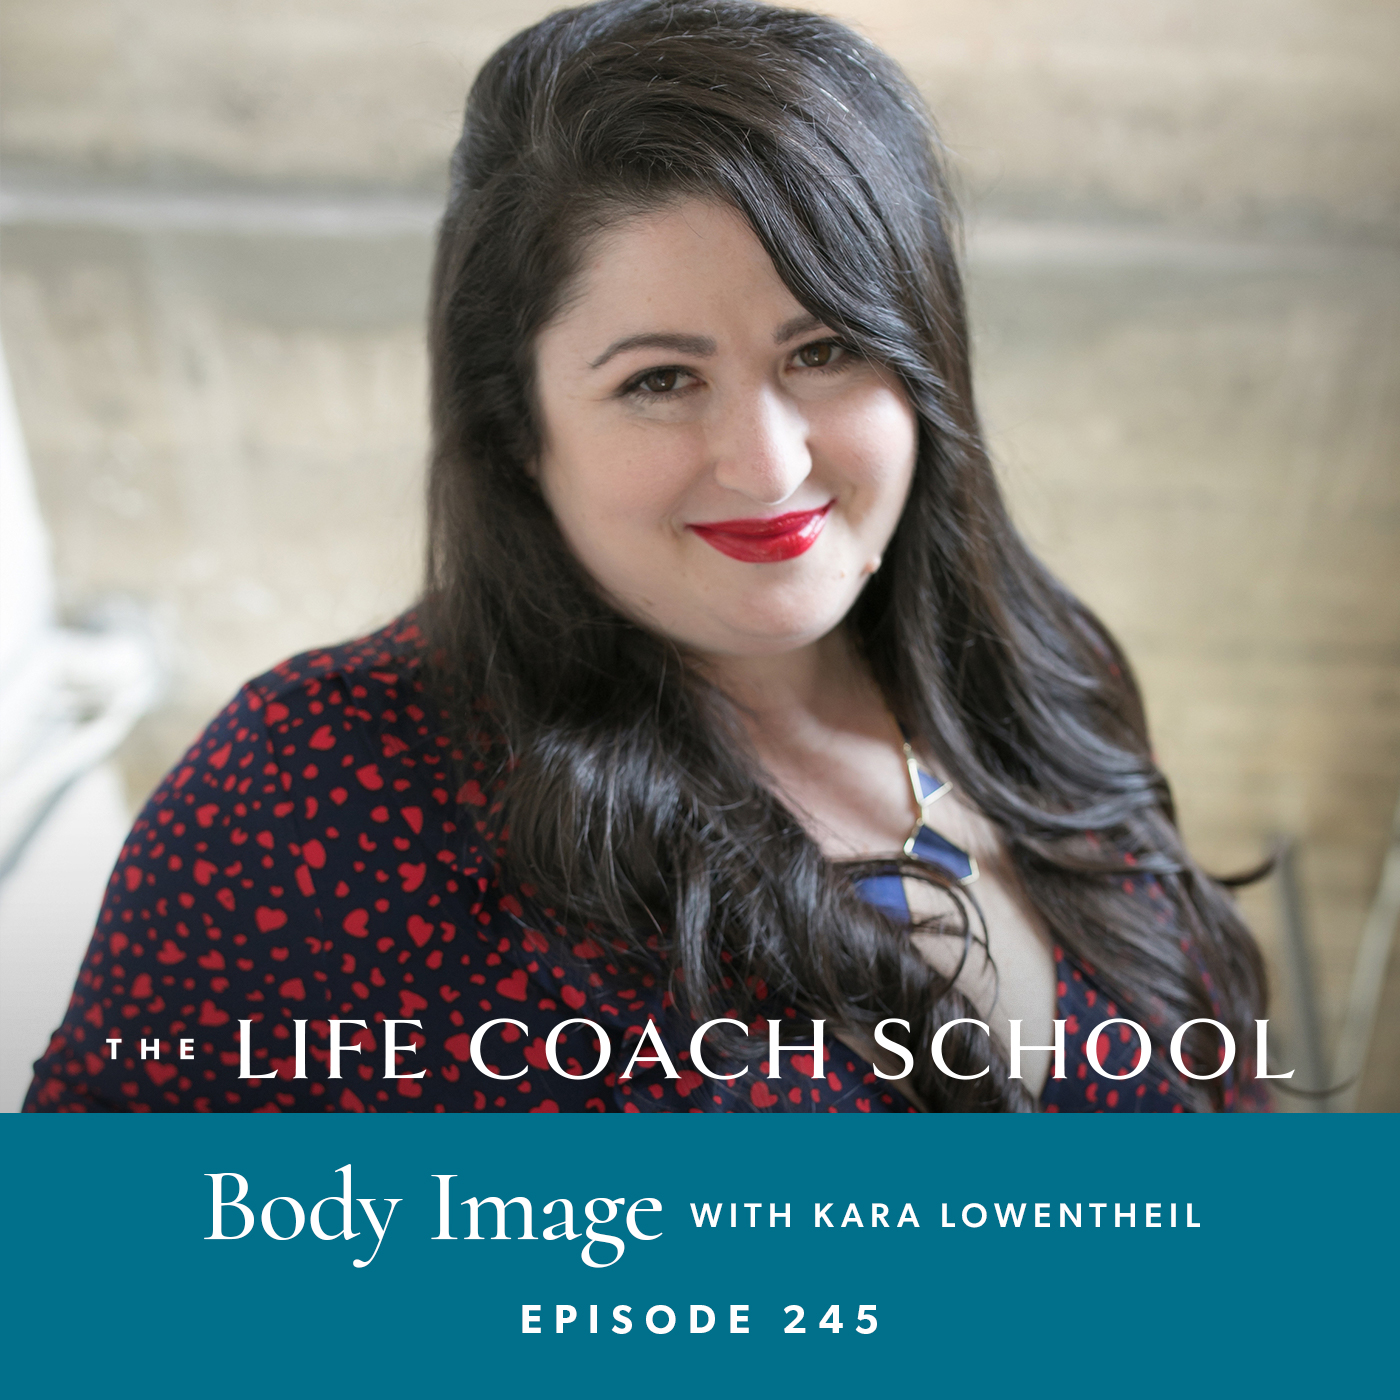 The Life Coach School Podcast with Brooke Castillo | Episode 245 | Body Image with Kara Loewentheil